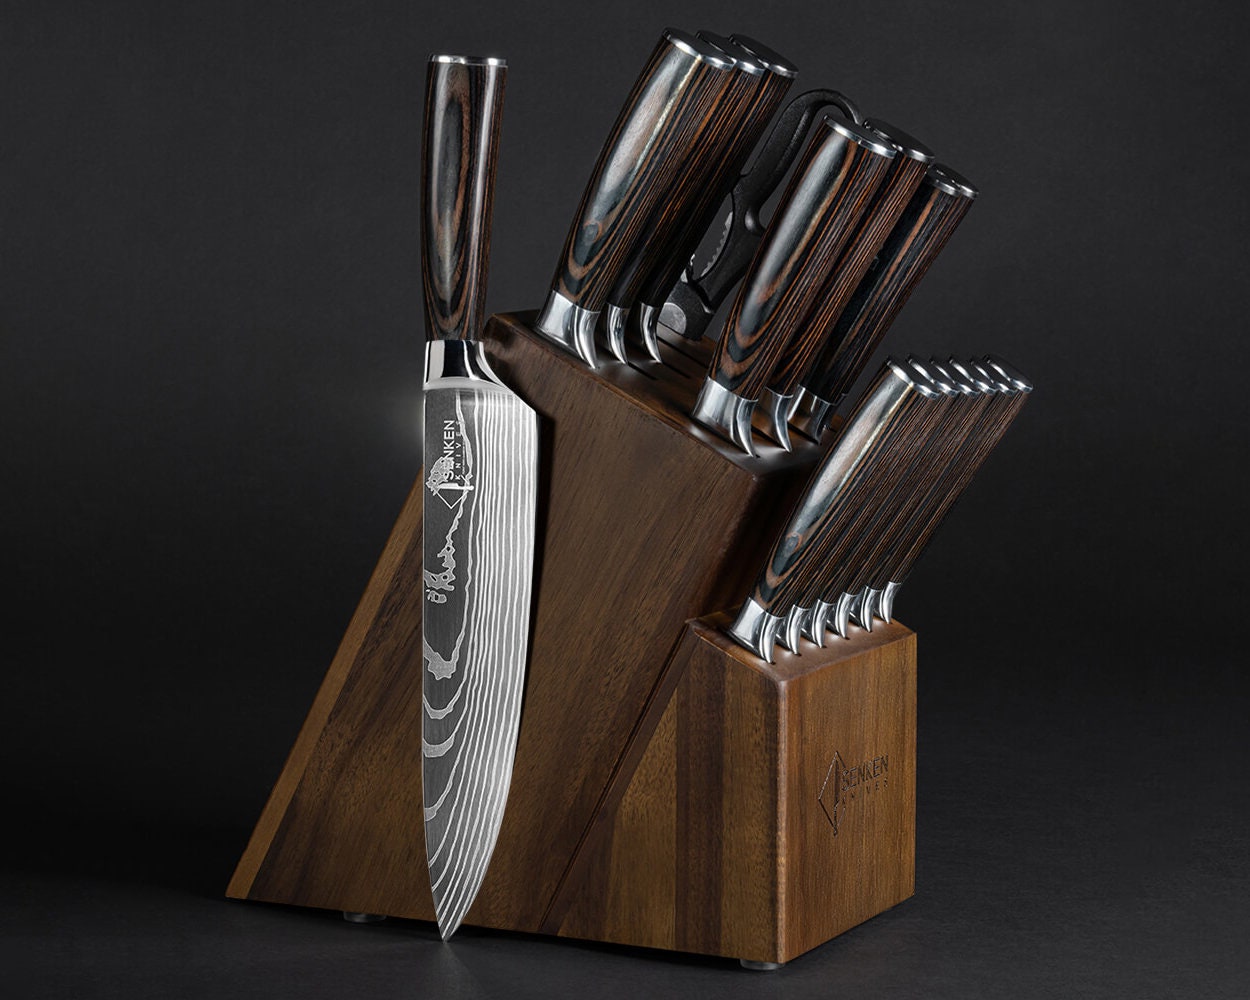 2-Piece COMMERCIAL KNIFE SET Full Tang Phenolic Handles - Gift Box